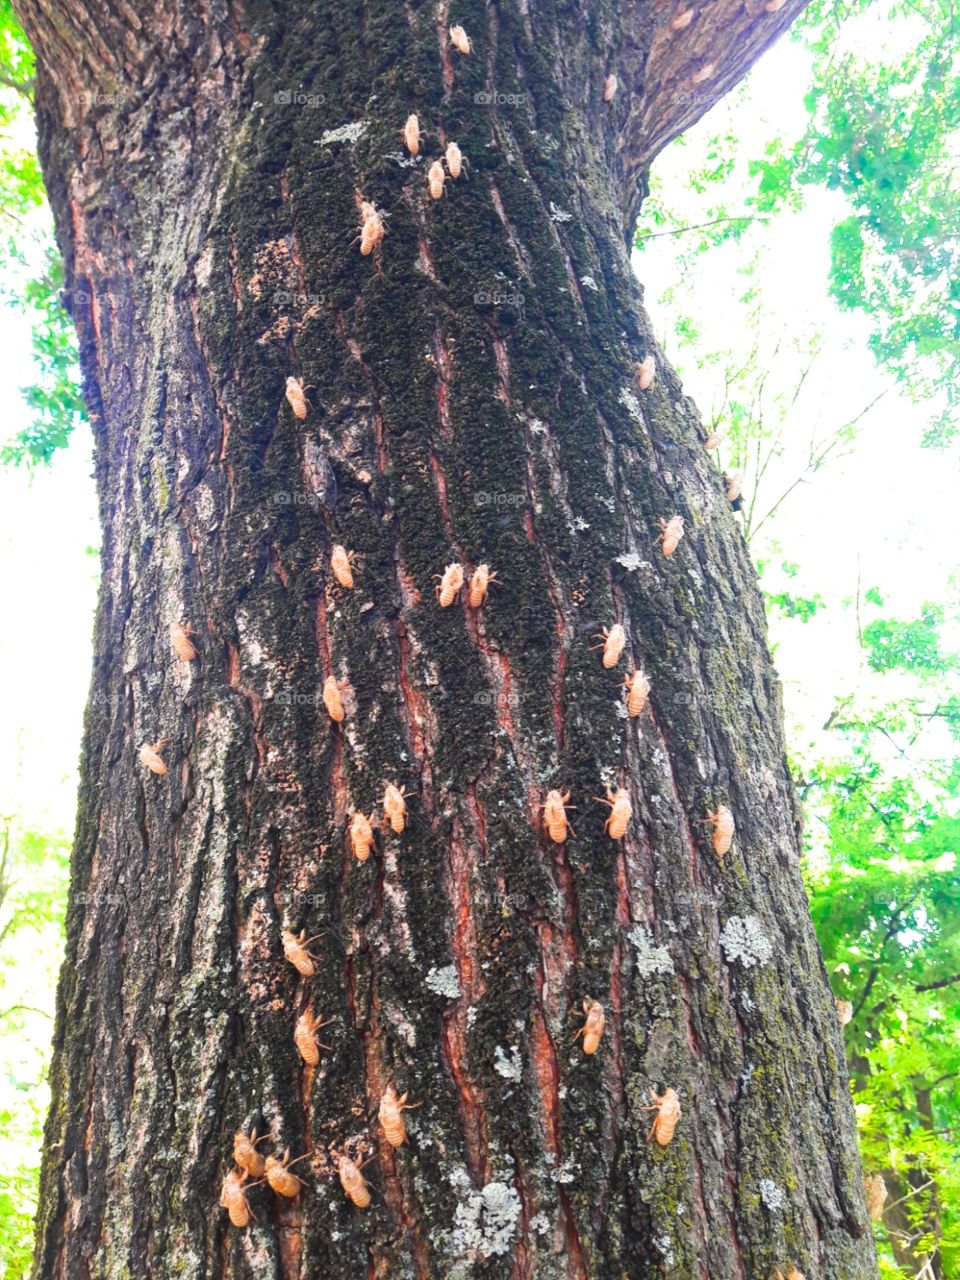 skin of dead insects on tree